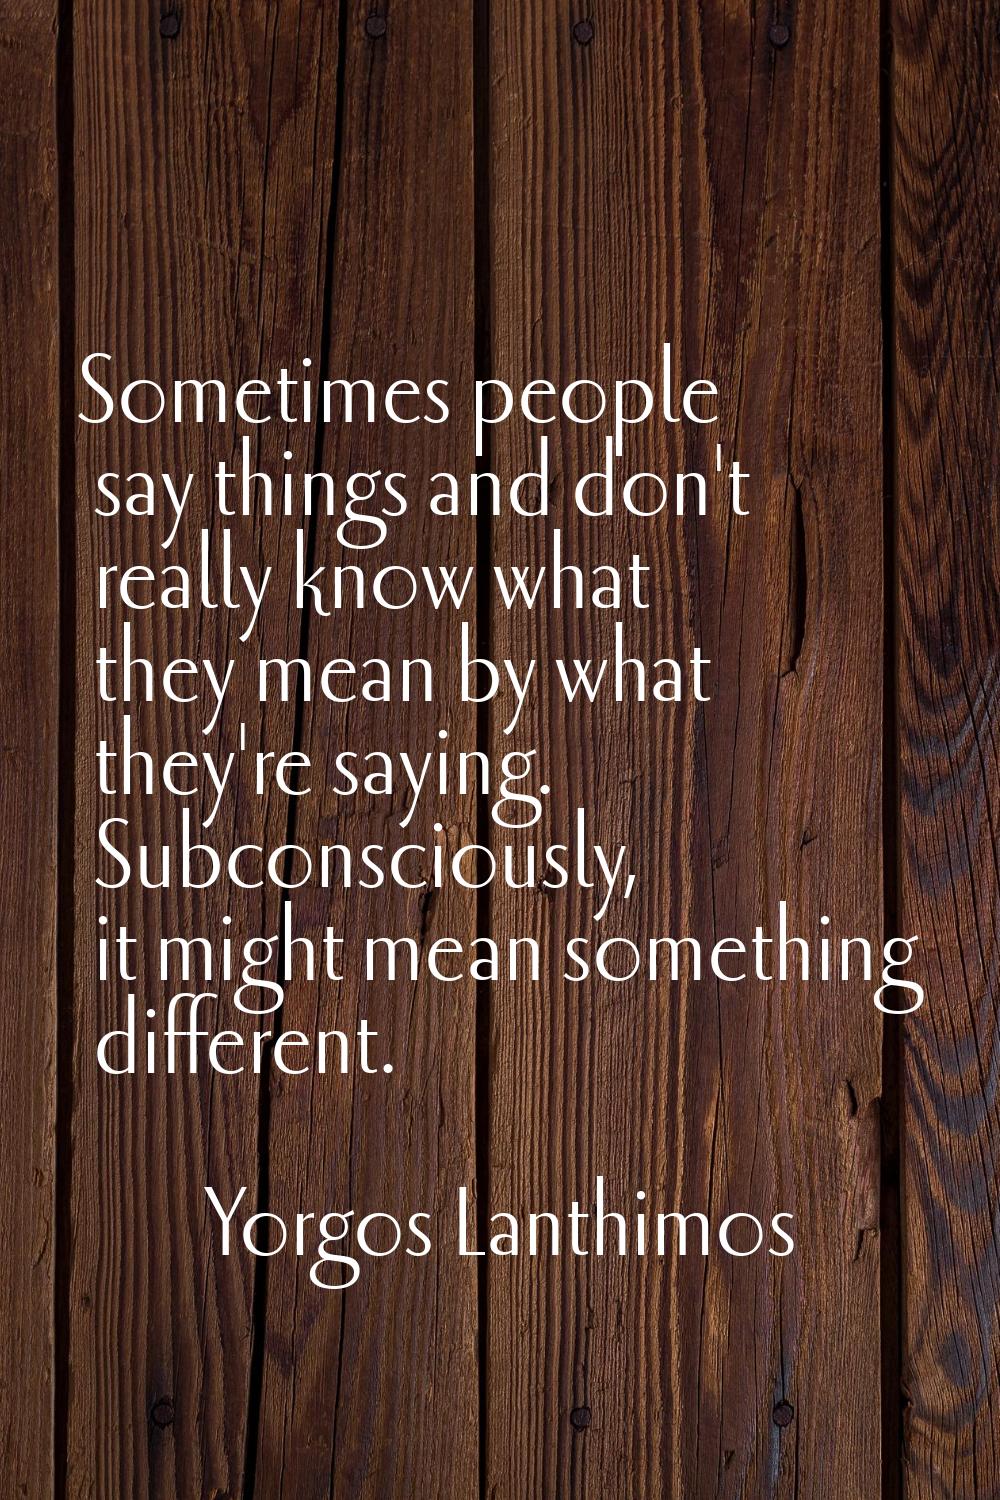 Sometimes people say things and don't really know what they mean by what they're saying. Subconscio